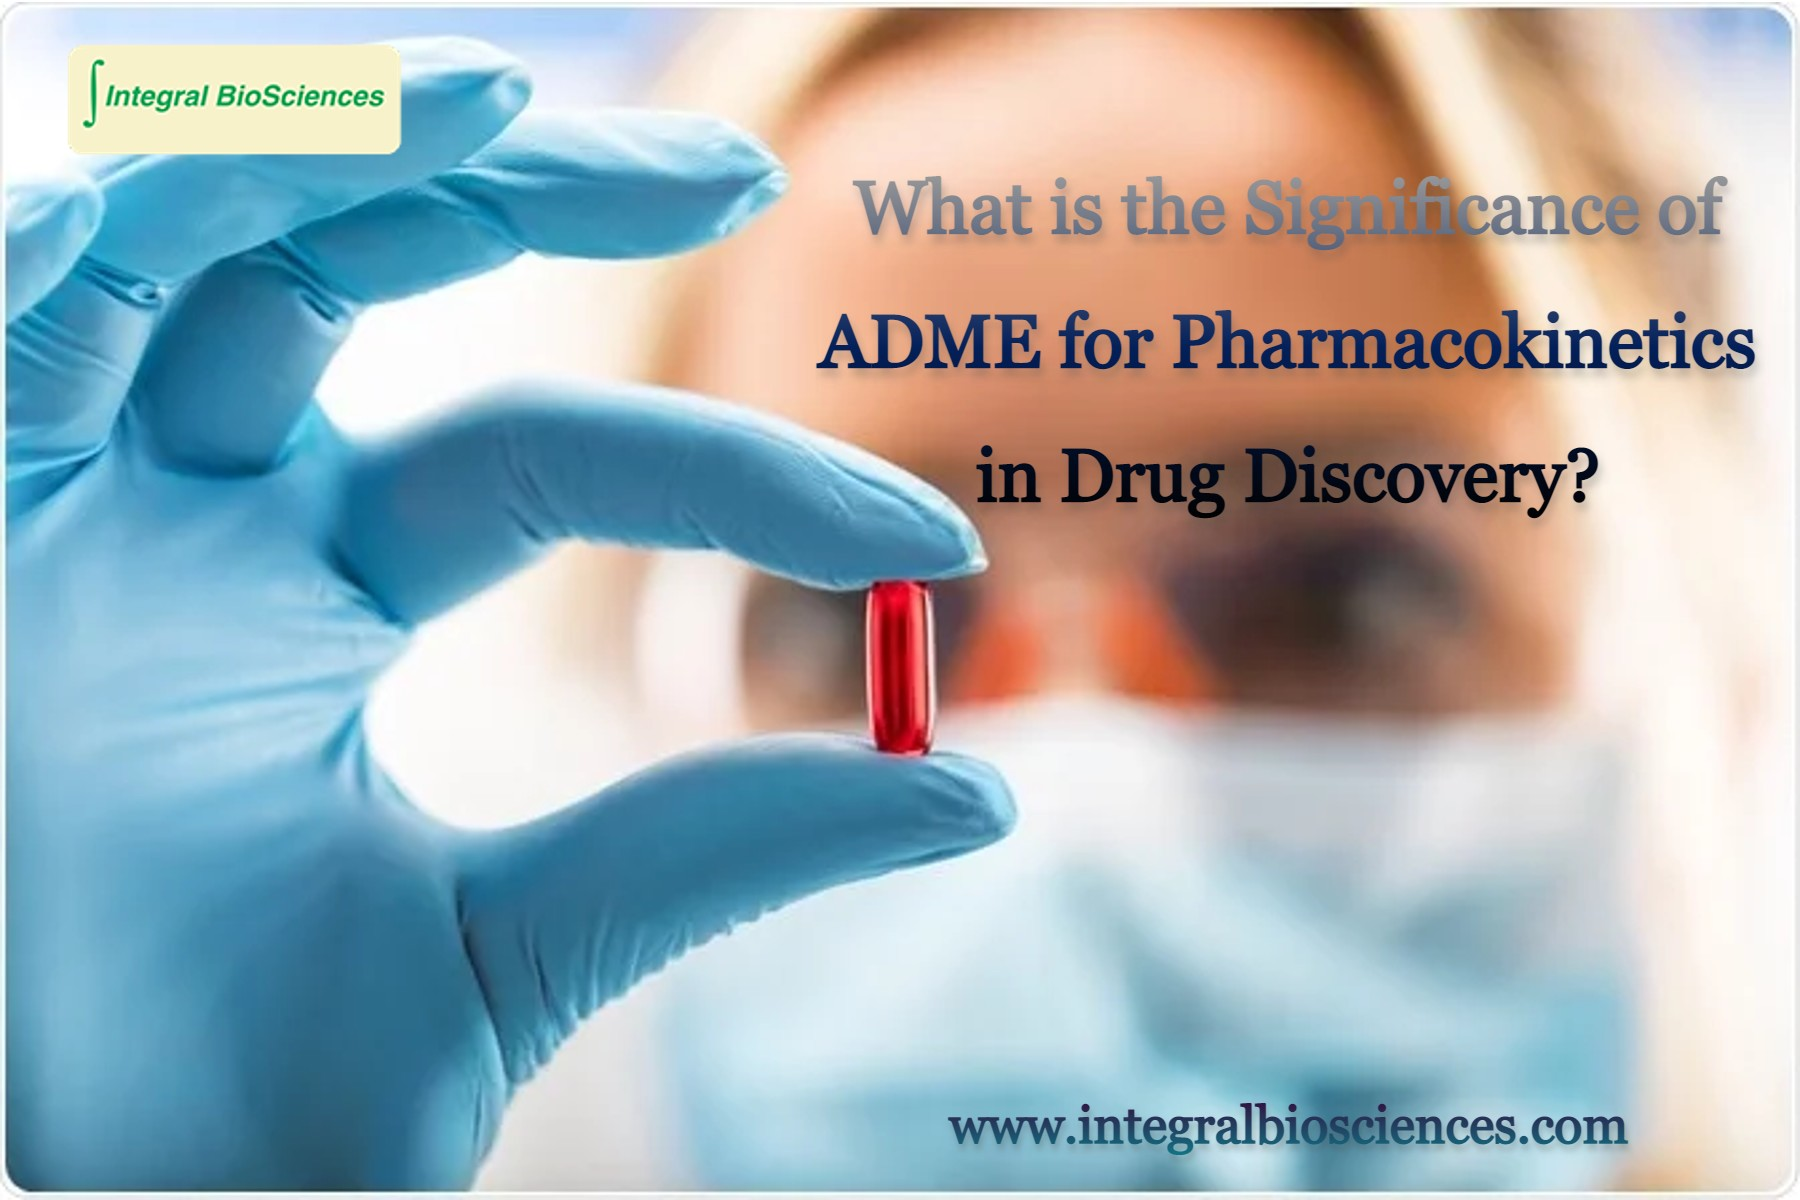 Significance of ADME for Pharmacokinetics in Drug Discovery